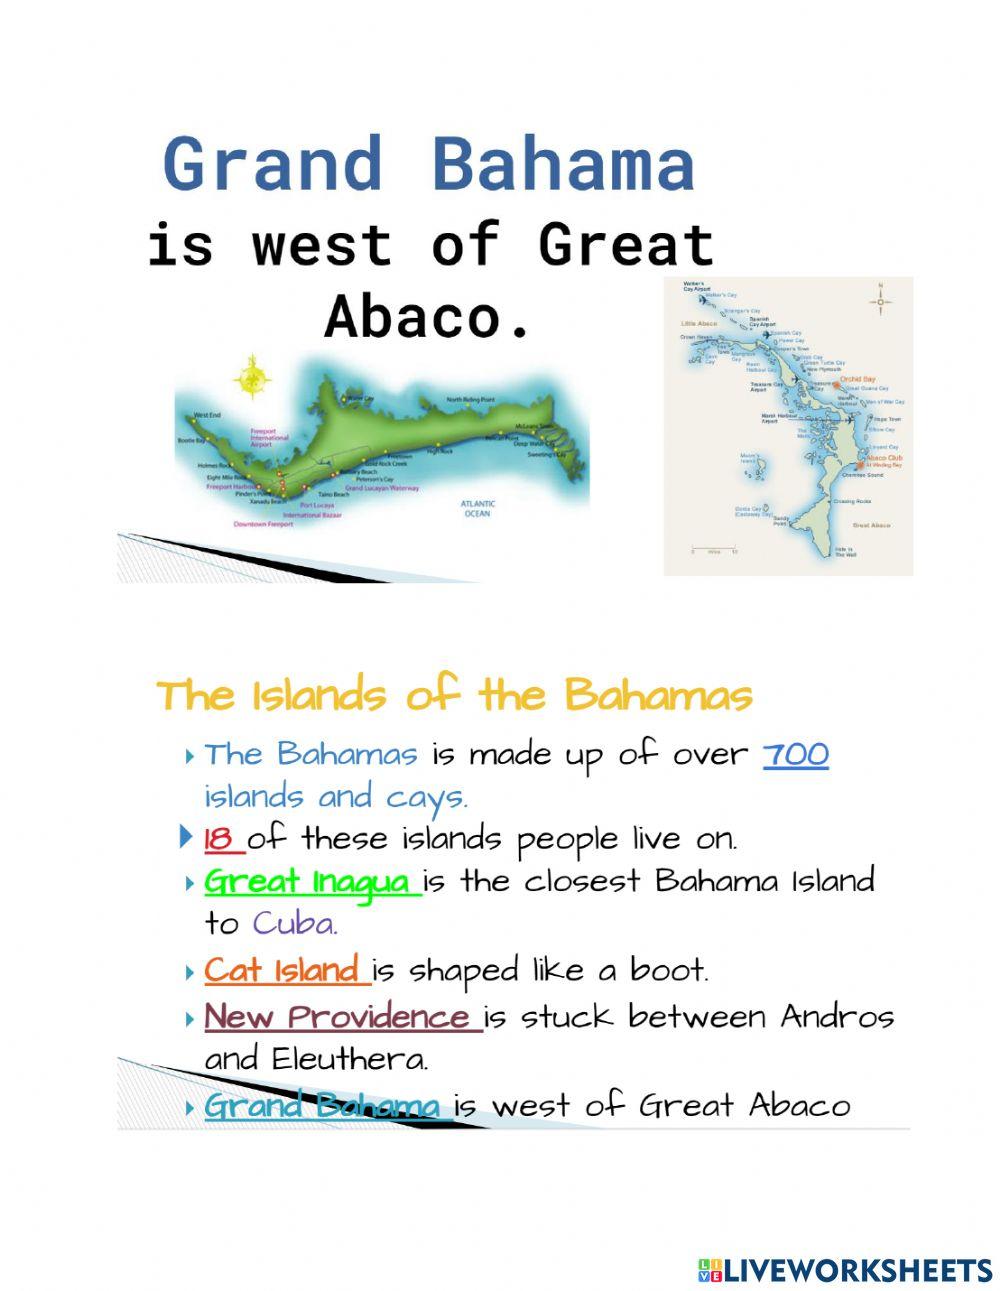 Where In The World Is The Bahamas?